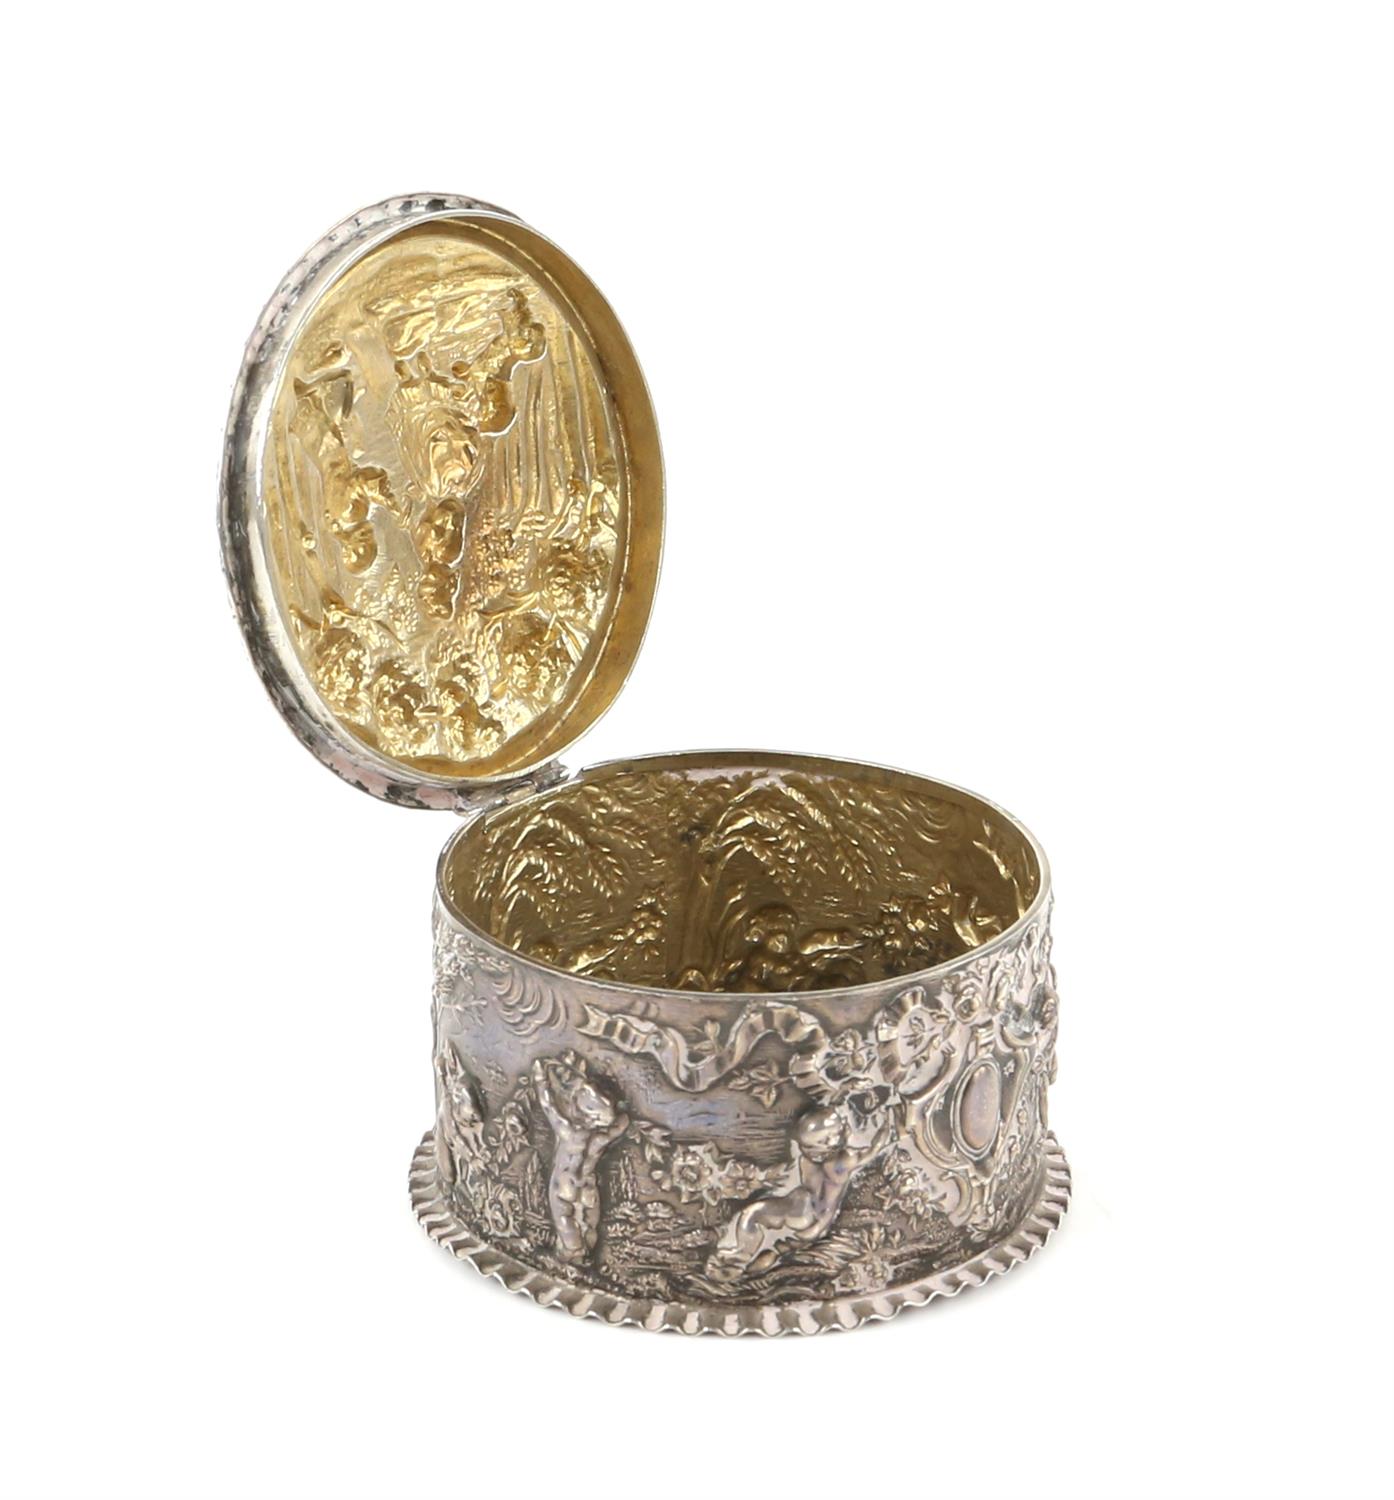 Victorian silver circular box embossed with a man proposing to a woman, by Deakin & Francis Ltd. - Image 3 of 9